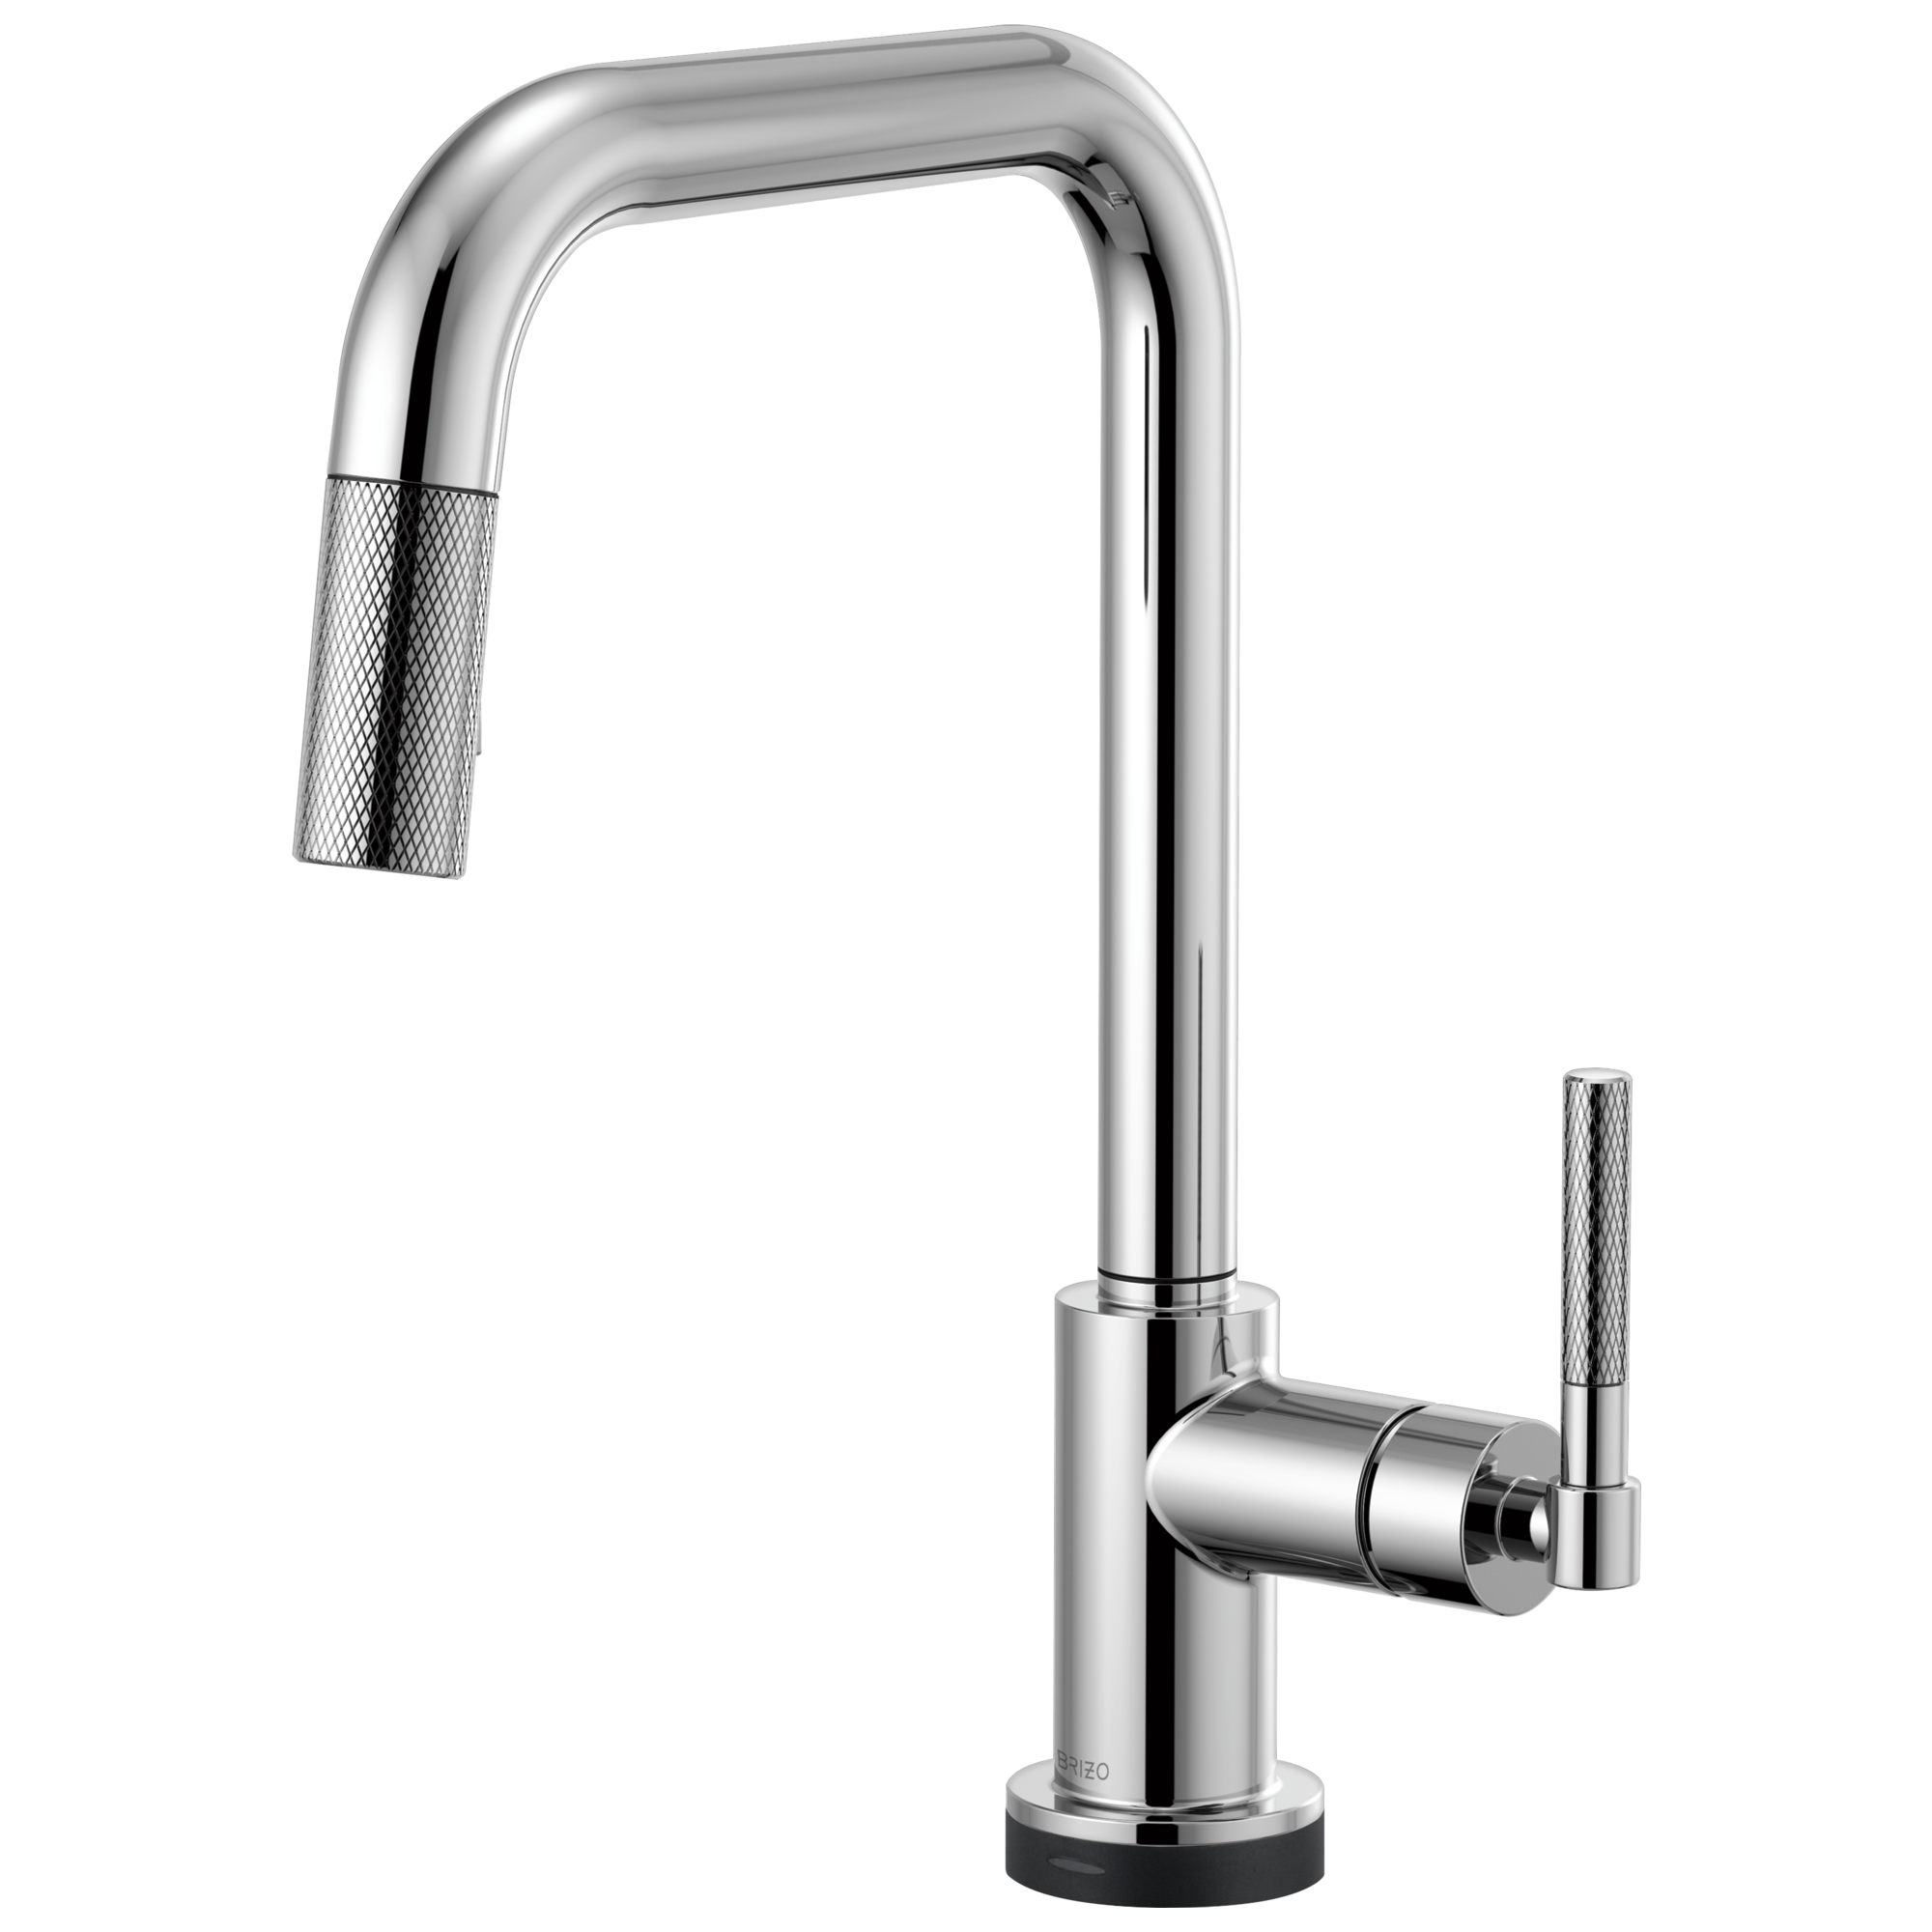 Brizo Litze: SmartTouch Pull-Down Faucet with Square Spout and Knurled Handle